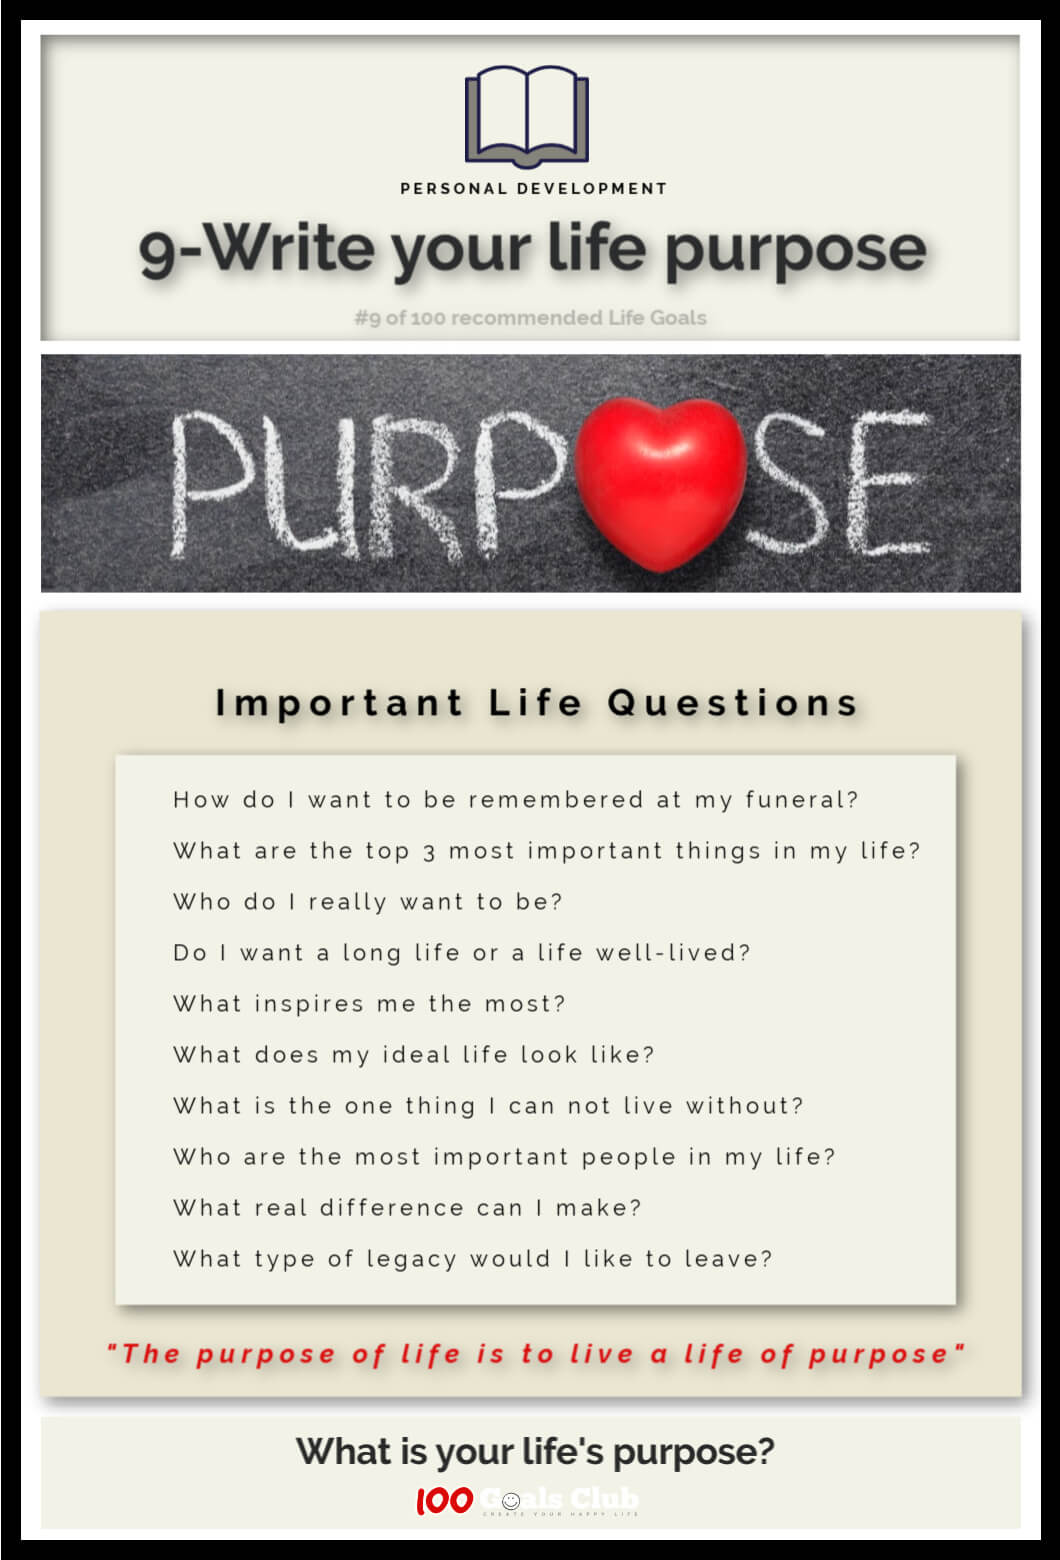 research on purpose in life